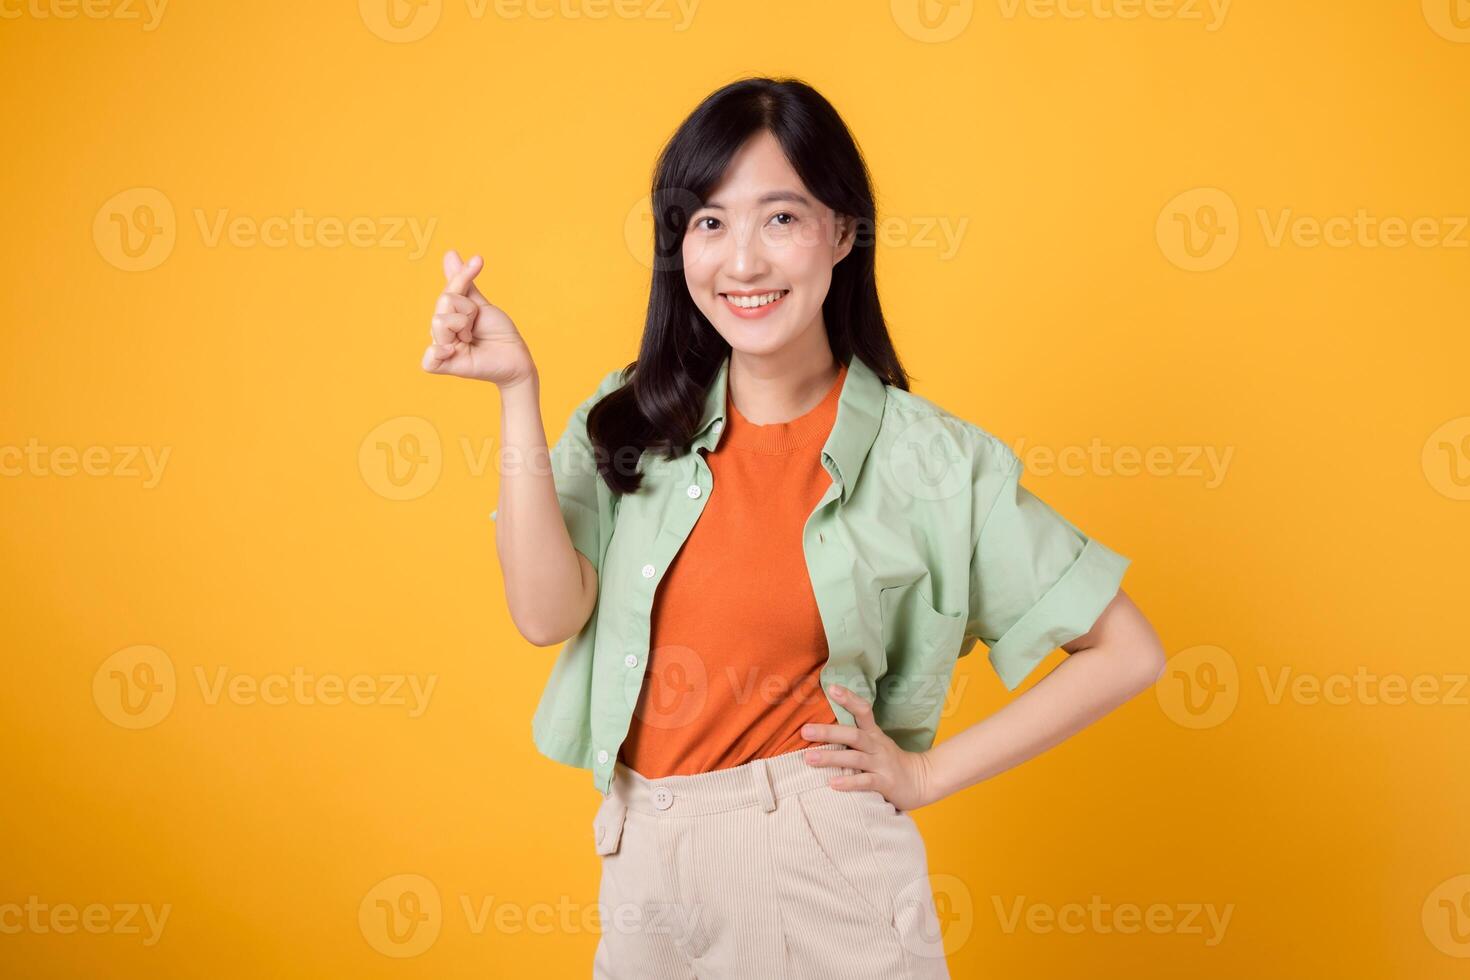 happiness with a young Asian woman in her 30s, dressed in an orange shirt and green jumper. Her mini heart gesture, hip hold, and gentle smile convey a profound message through body language. photo